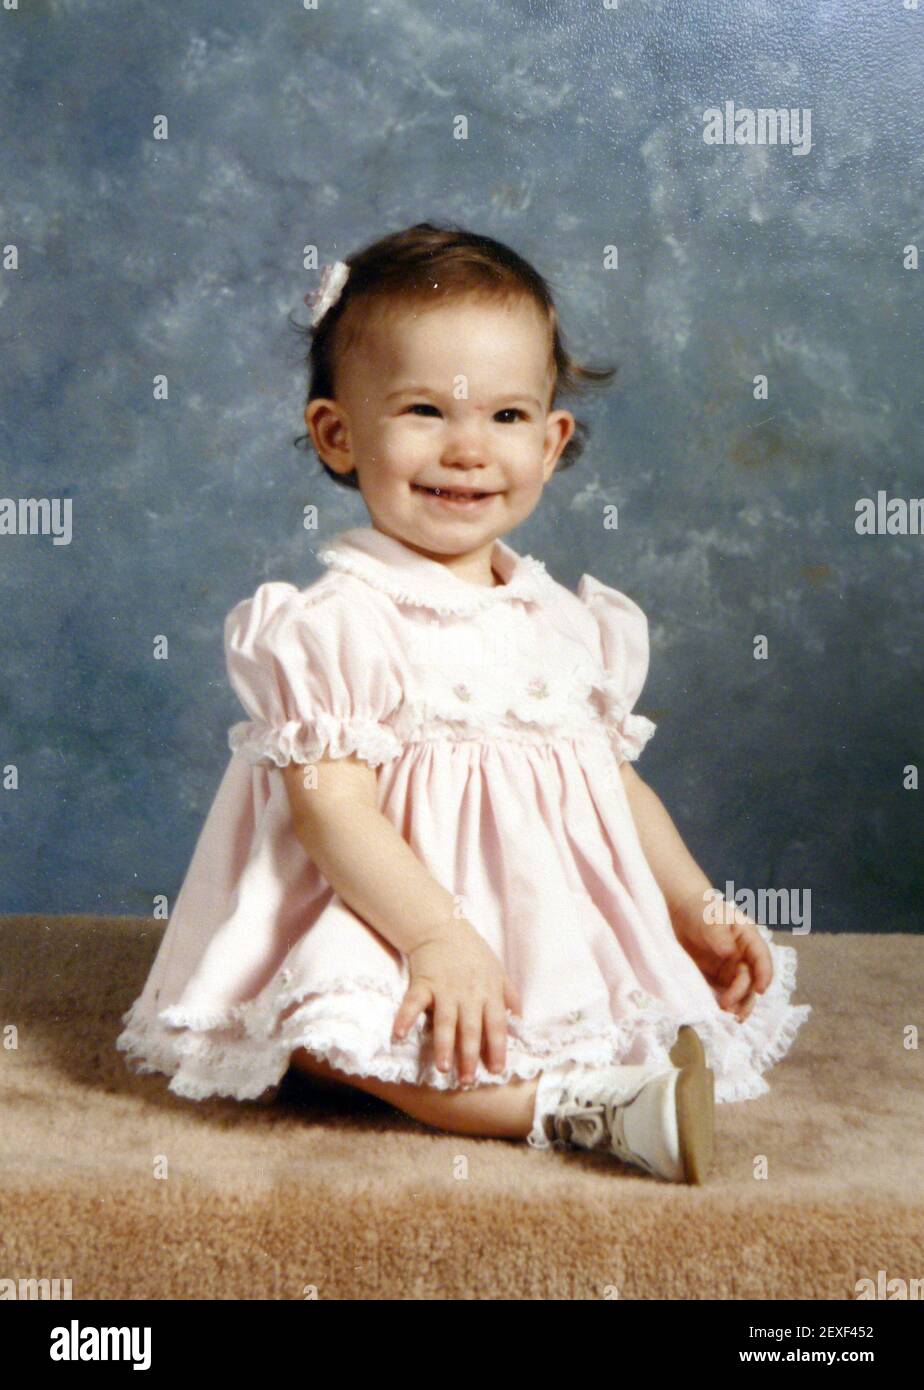 21 May 2015. Laurel, Mississippi. Collect photos of plus size model Tess Holliday (formerly known as Tess Munster, nÃ©e Ryann Hoven) in her formative years from a family album. Tass as an infant. Photo credit; Tadlock Charley Varley *** Please Use Credit from Credit Field *** Stock Photo